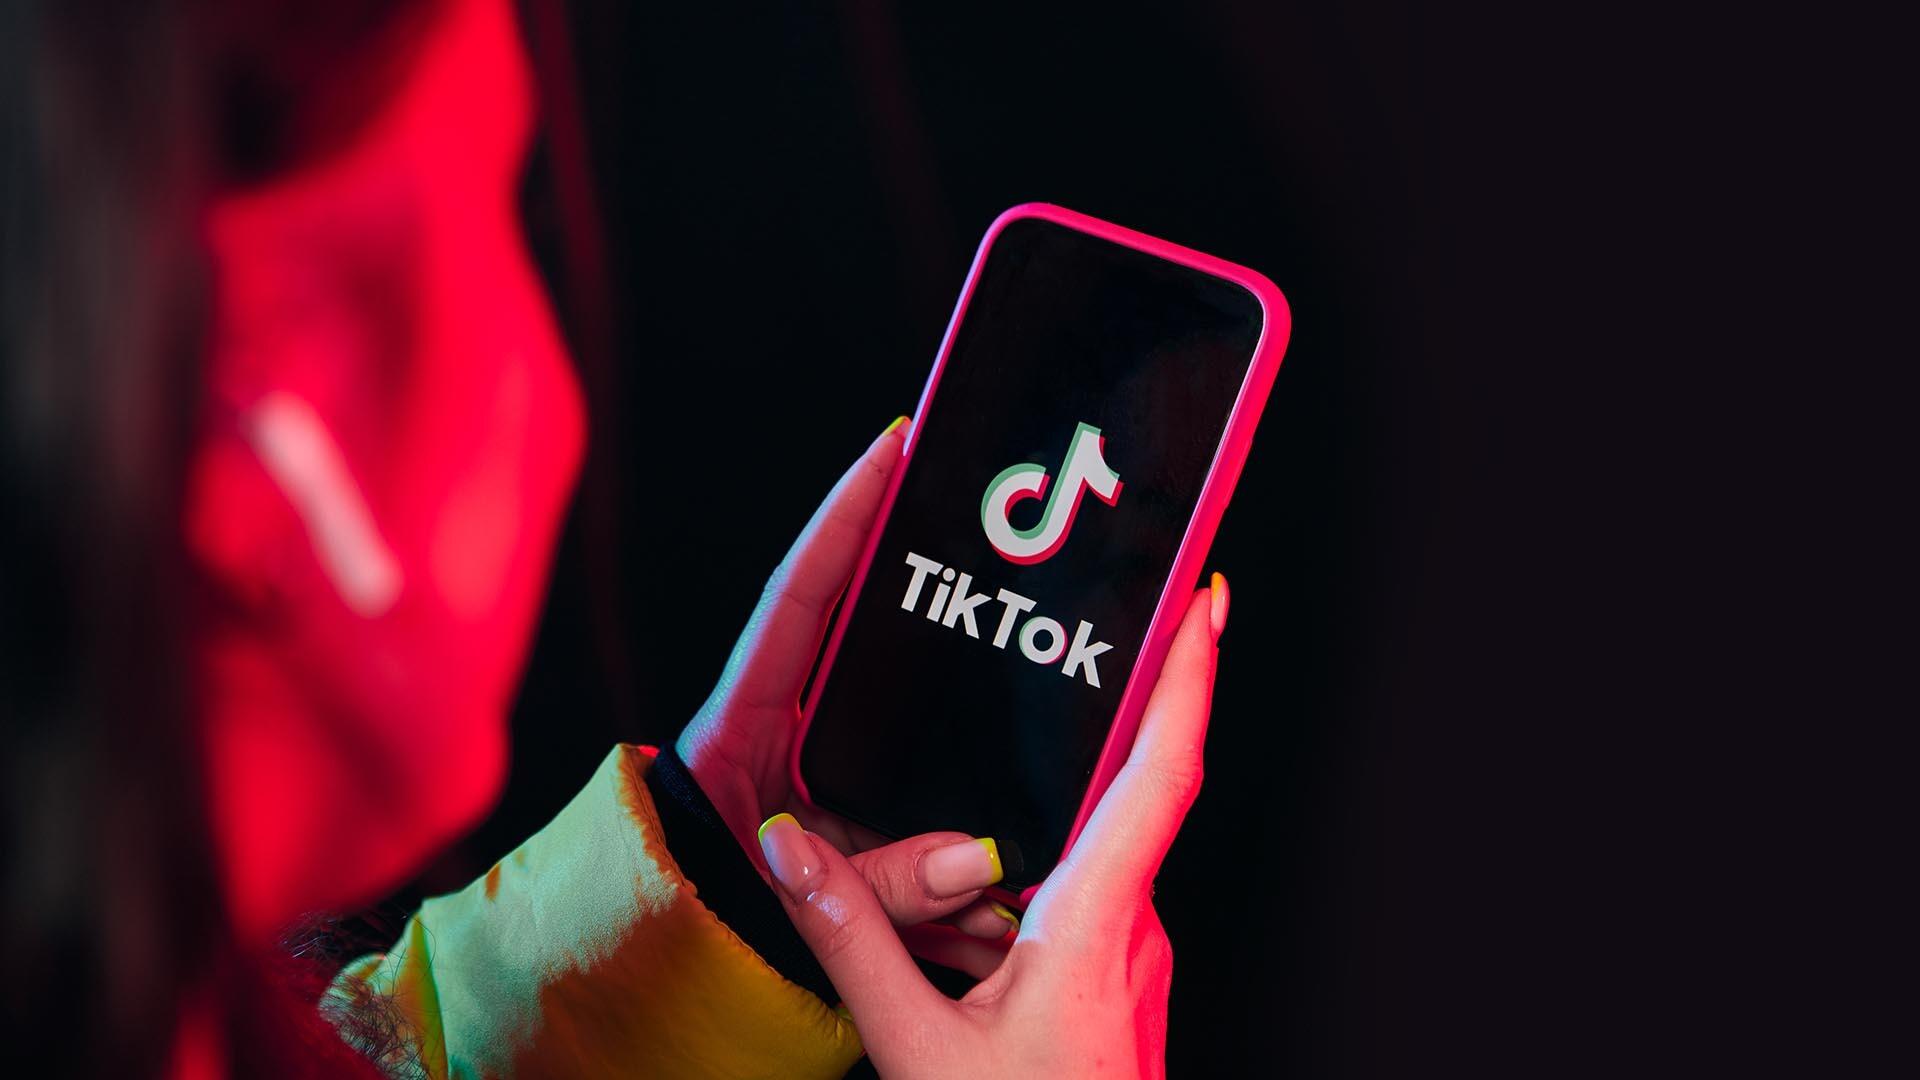 How to set up security and privacy in TikTok